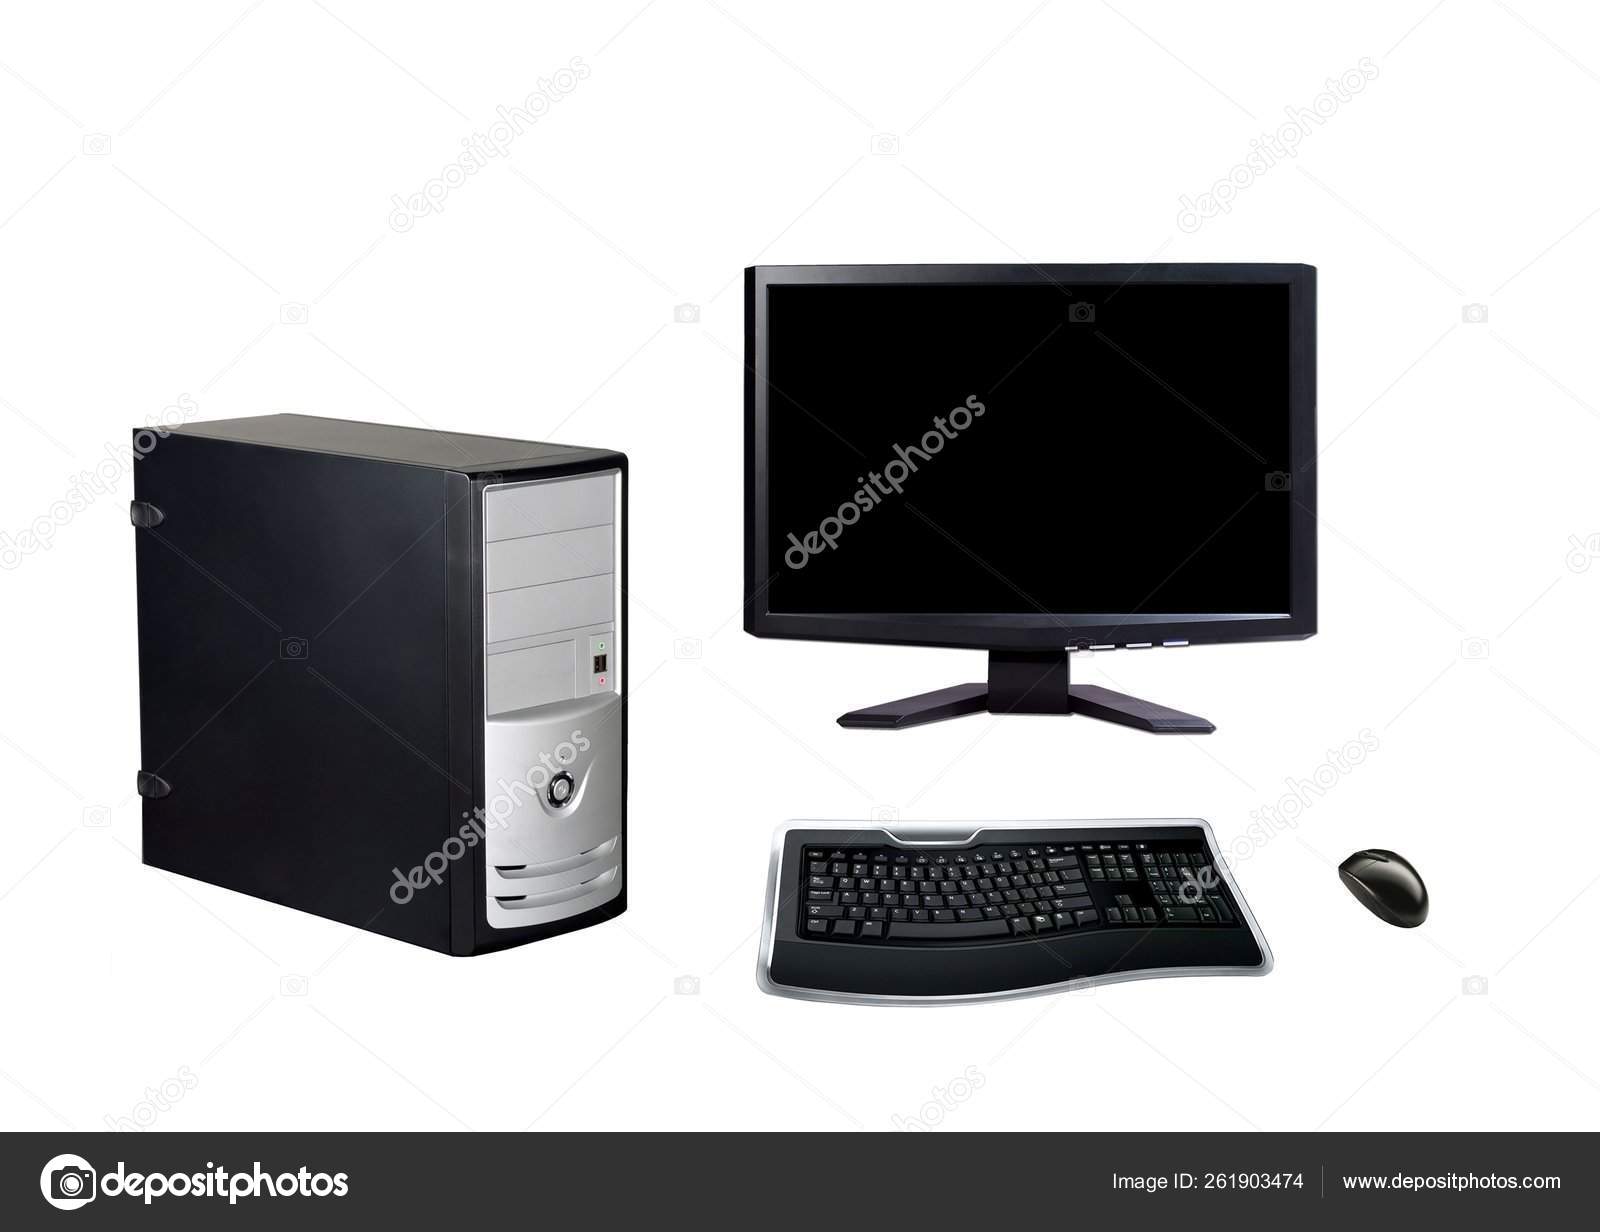 Rettidig uberørt 945 Modern Computer Accessories Stock Photo by ©YAYImages 261903474